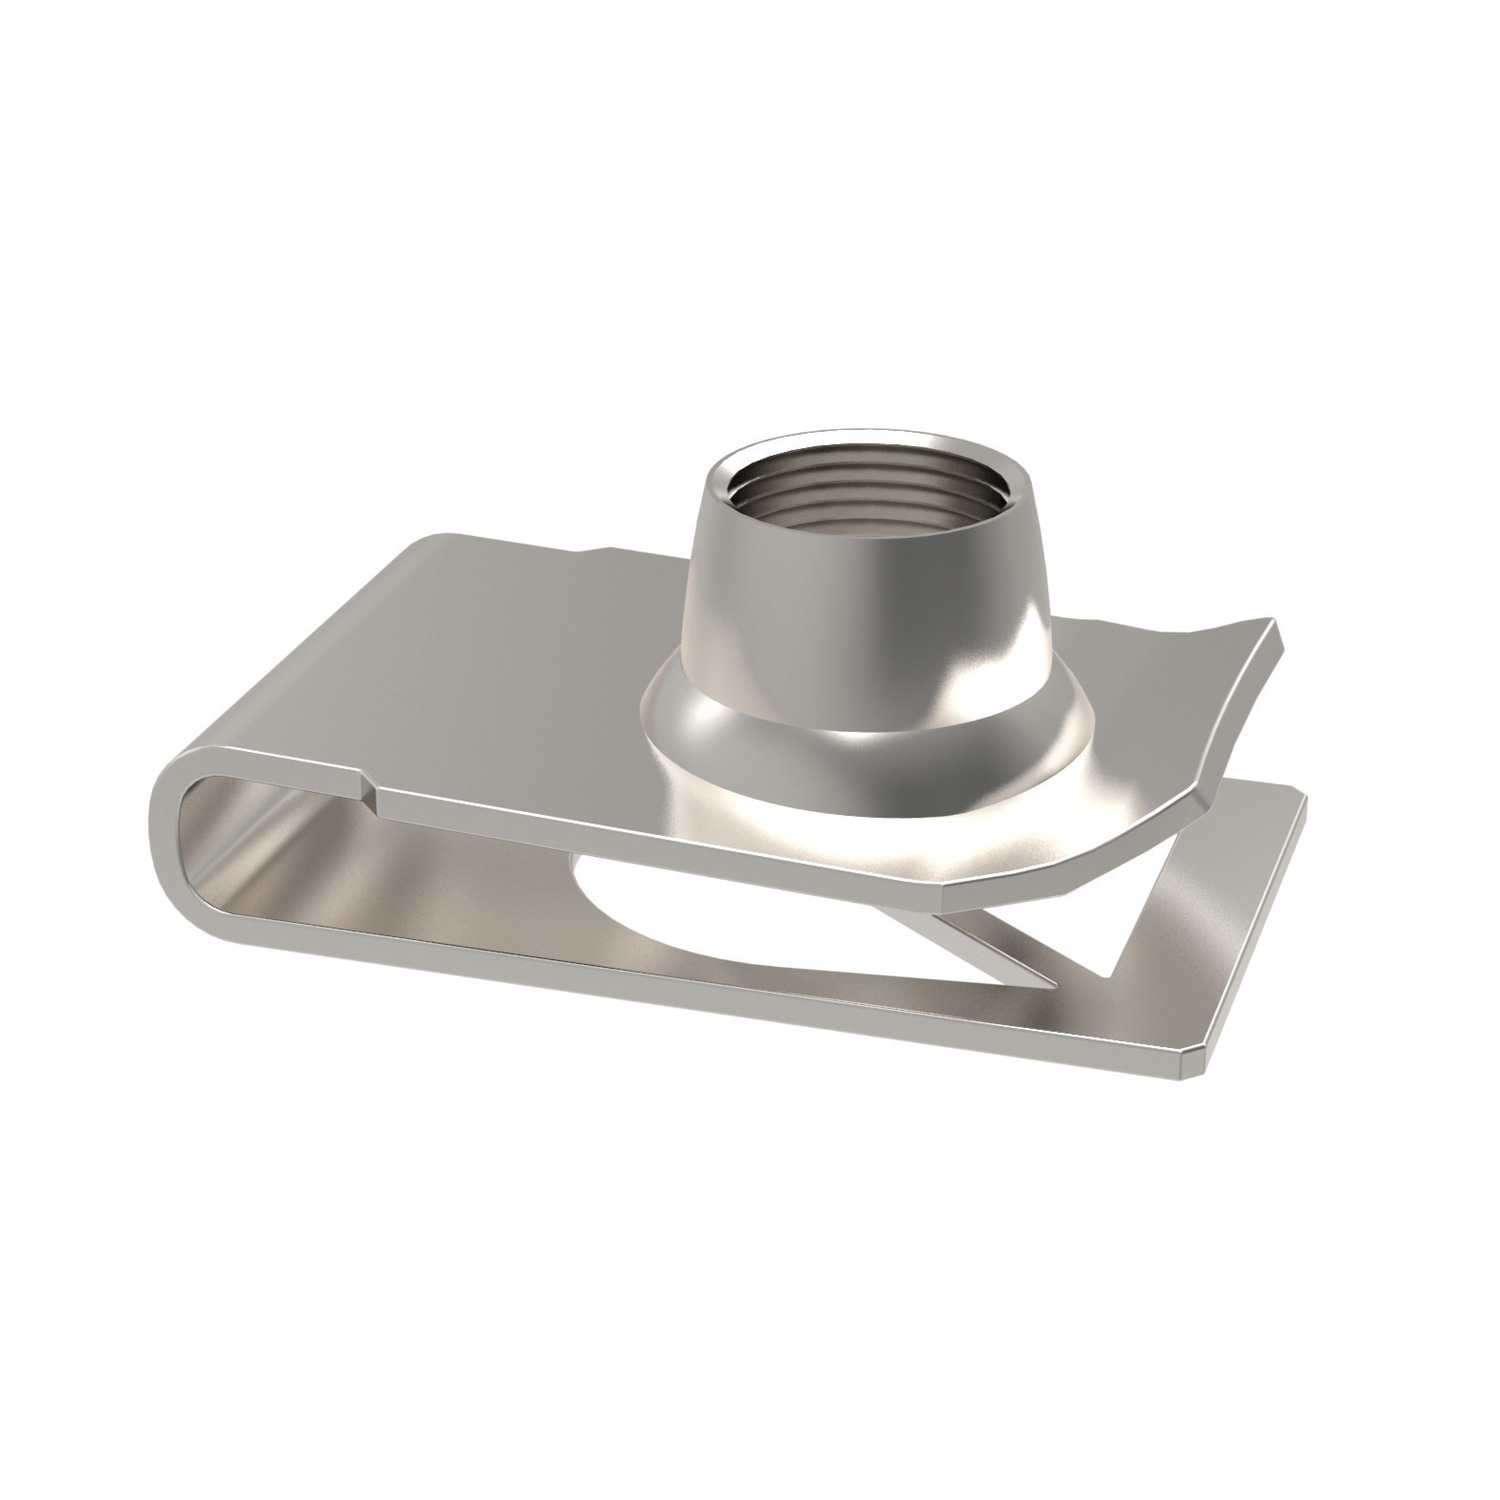 Sheet Metal Nuts Zinc plated clip nuts for use in sheet metal. They provide a degree of adjustment to assist screw alignment.